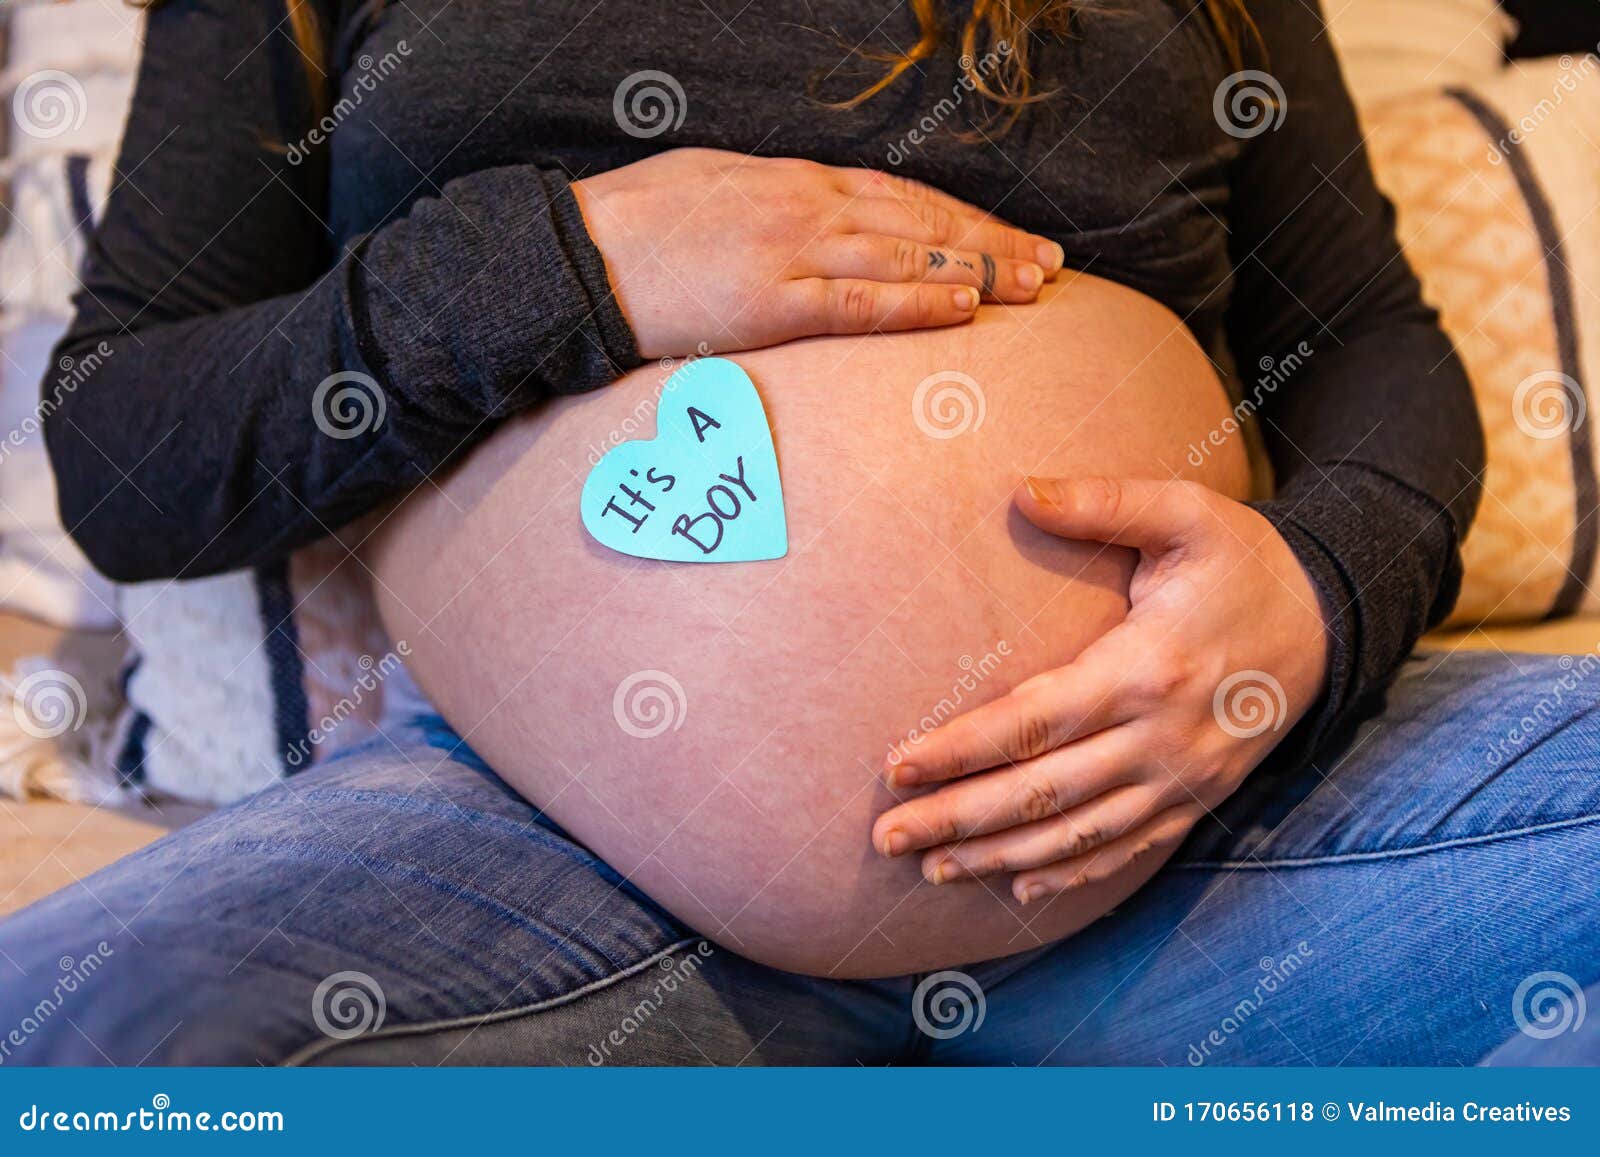 woman pregnant with a boy